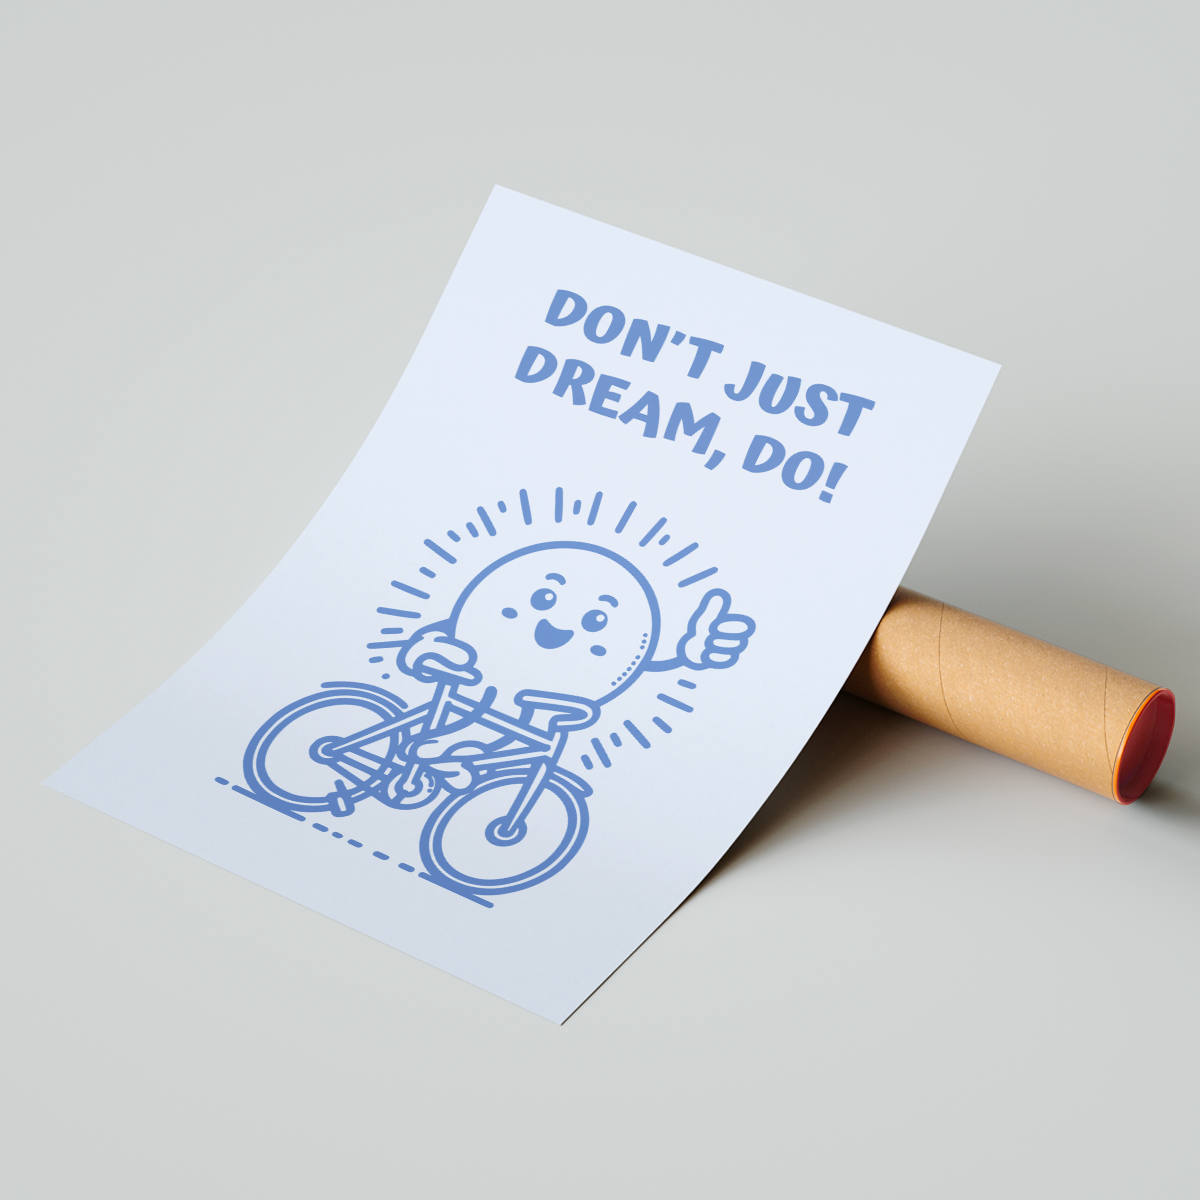 Affiche Don't Just Dream, Do!